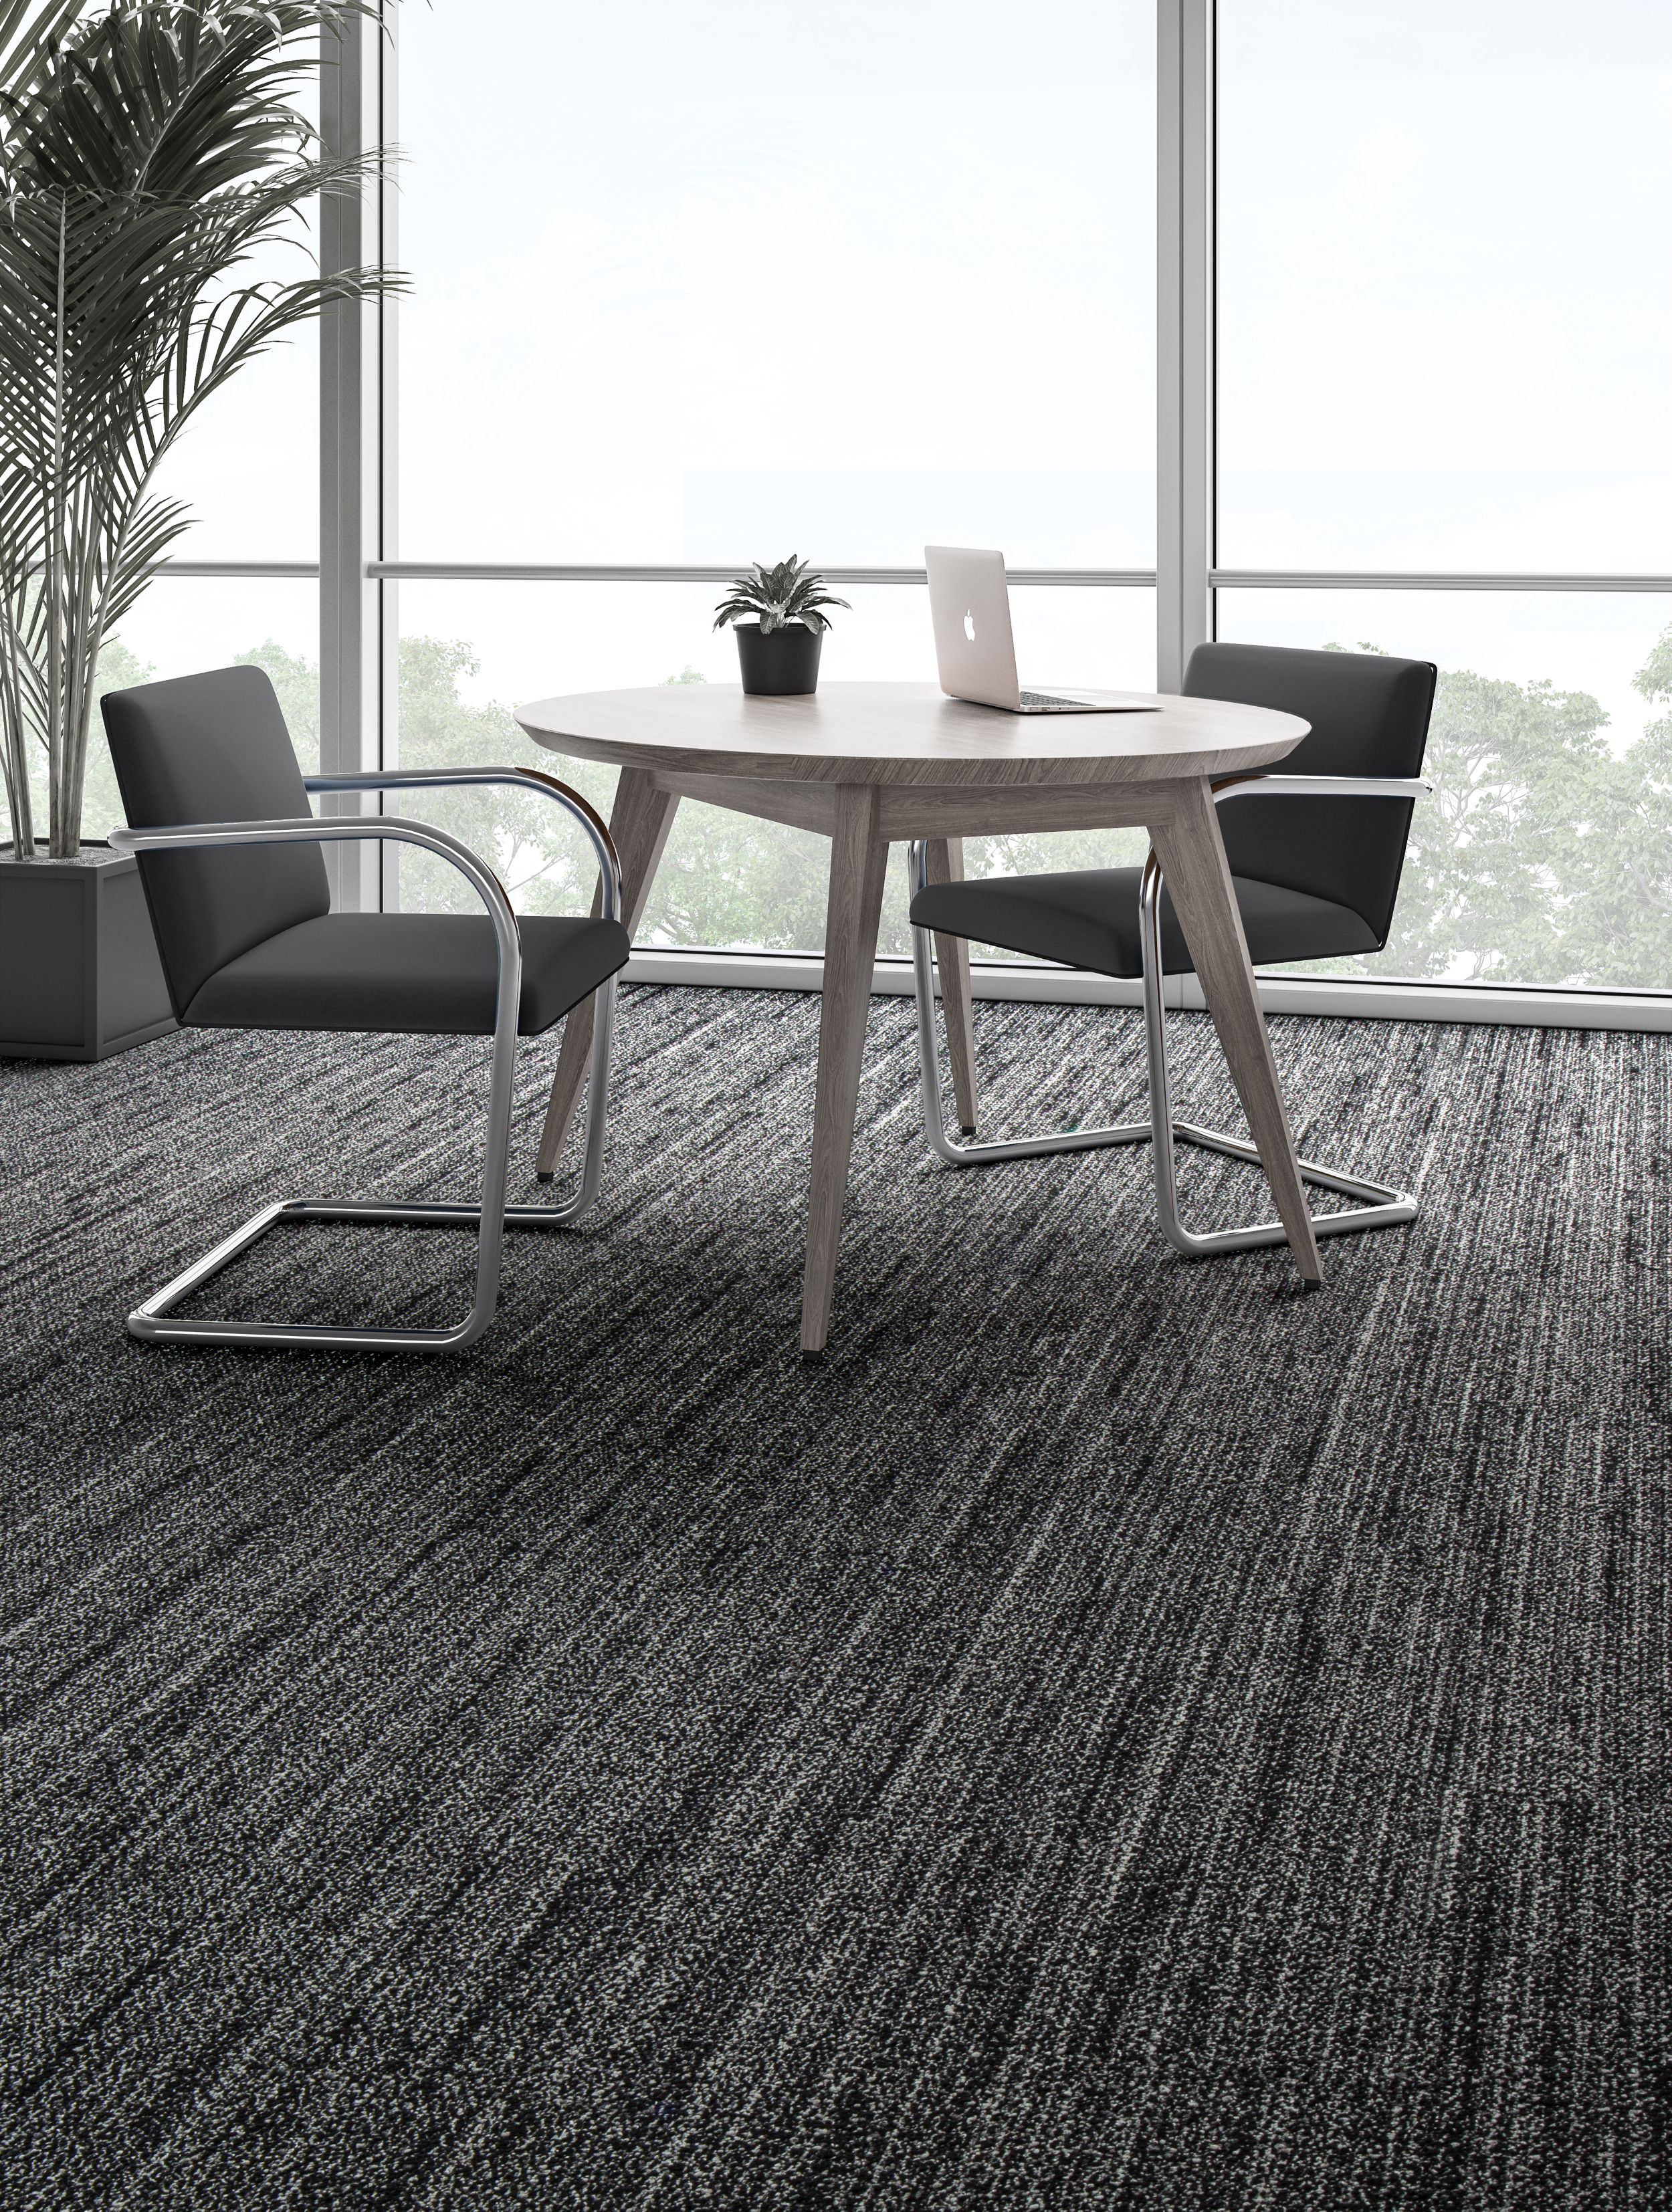 image Interface WW870 plank carpet tile shown with small table and chairs numéro 8